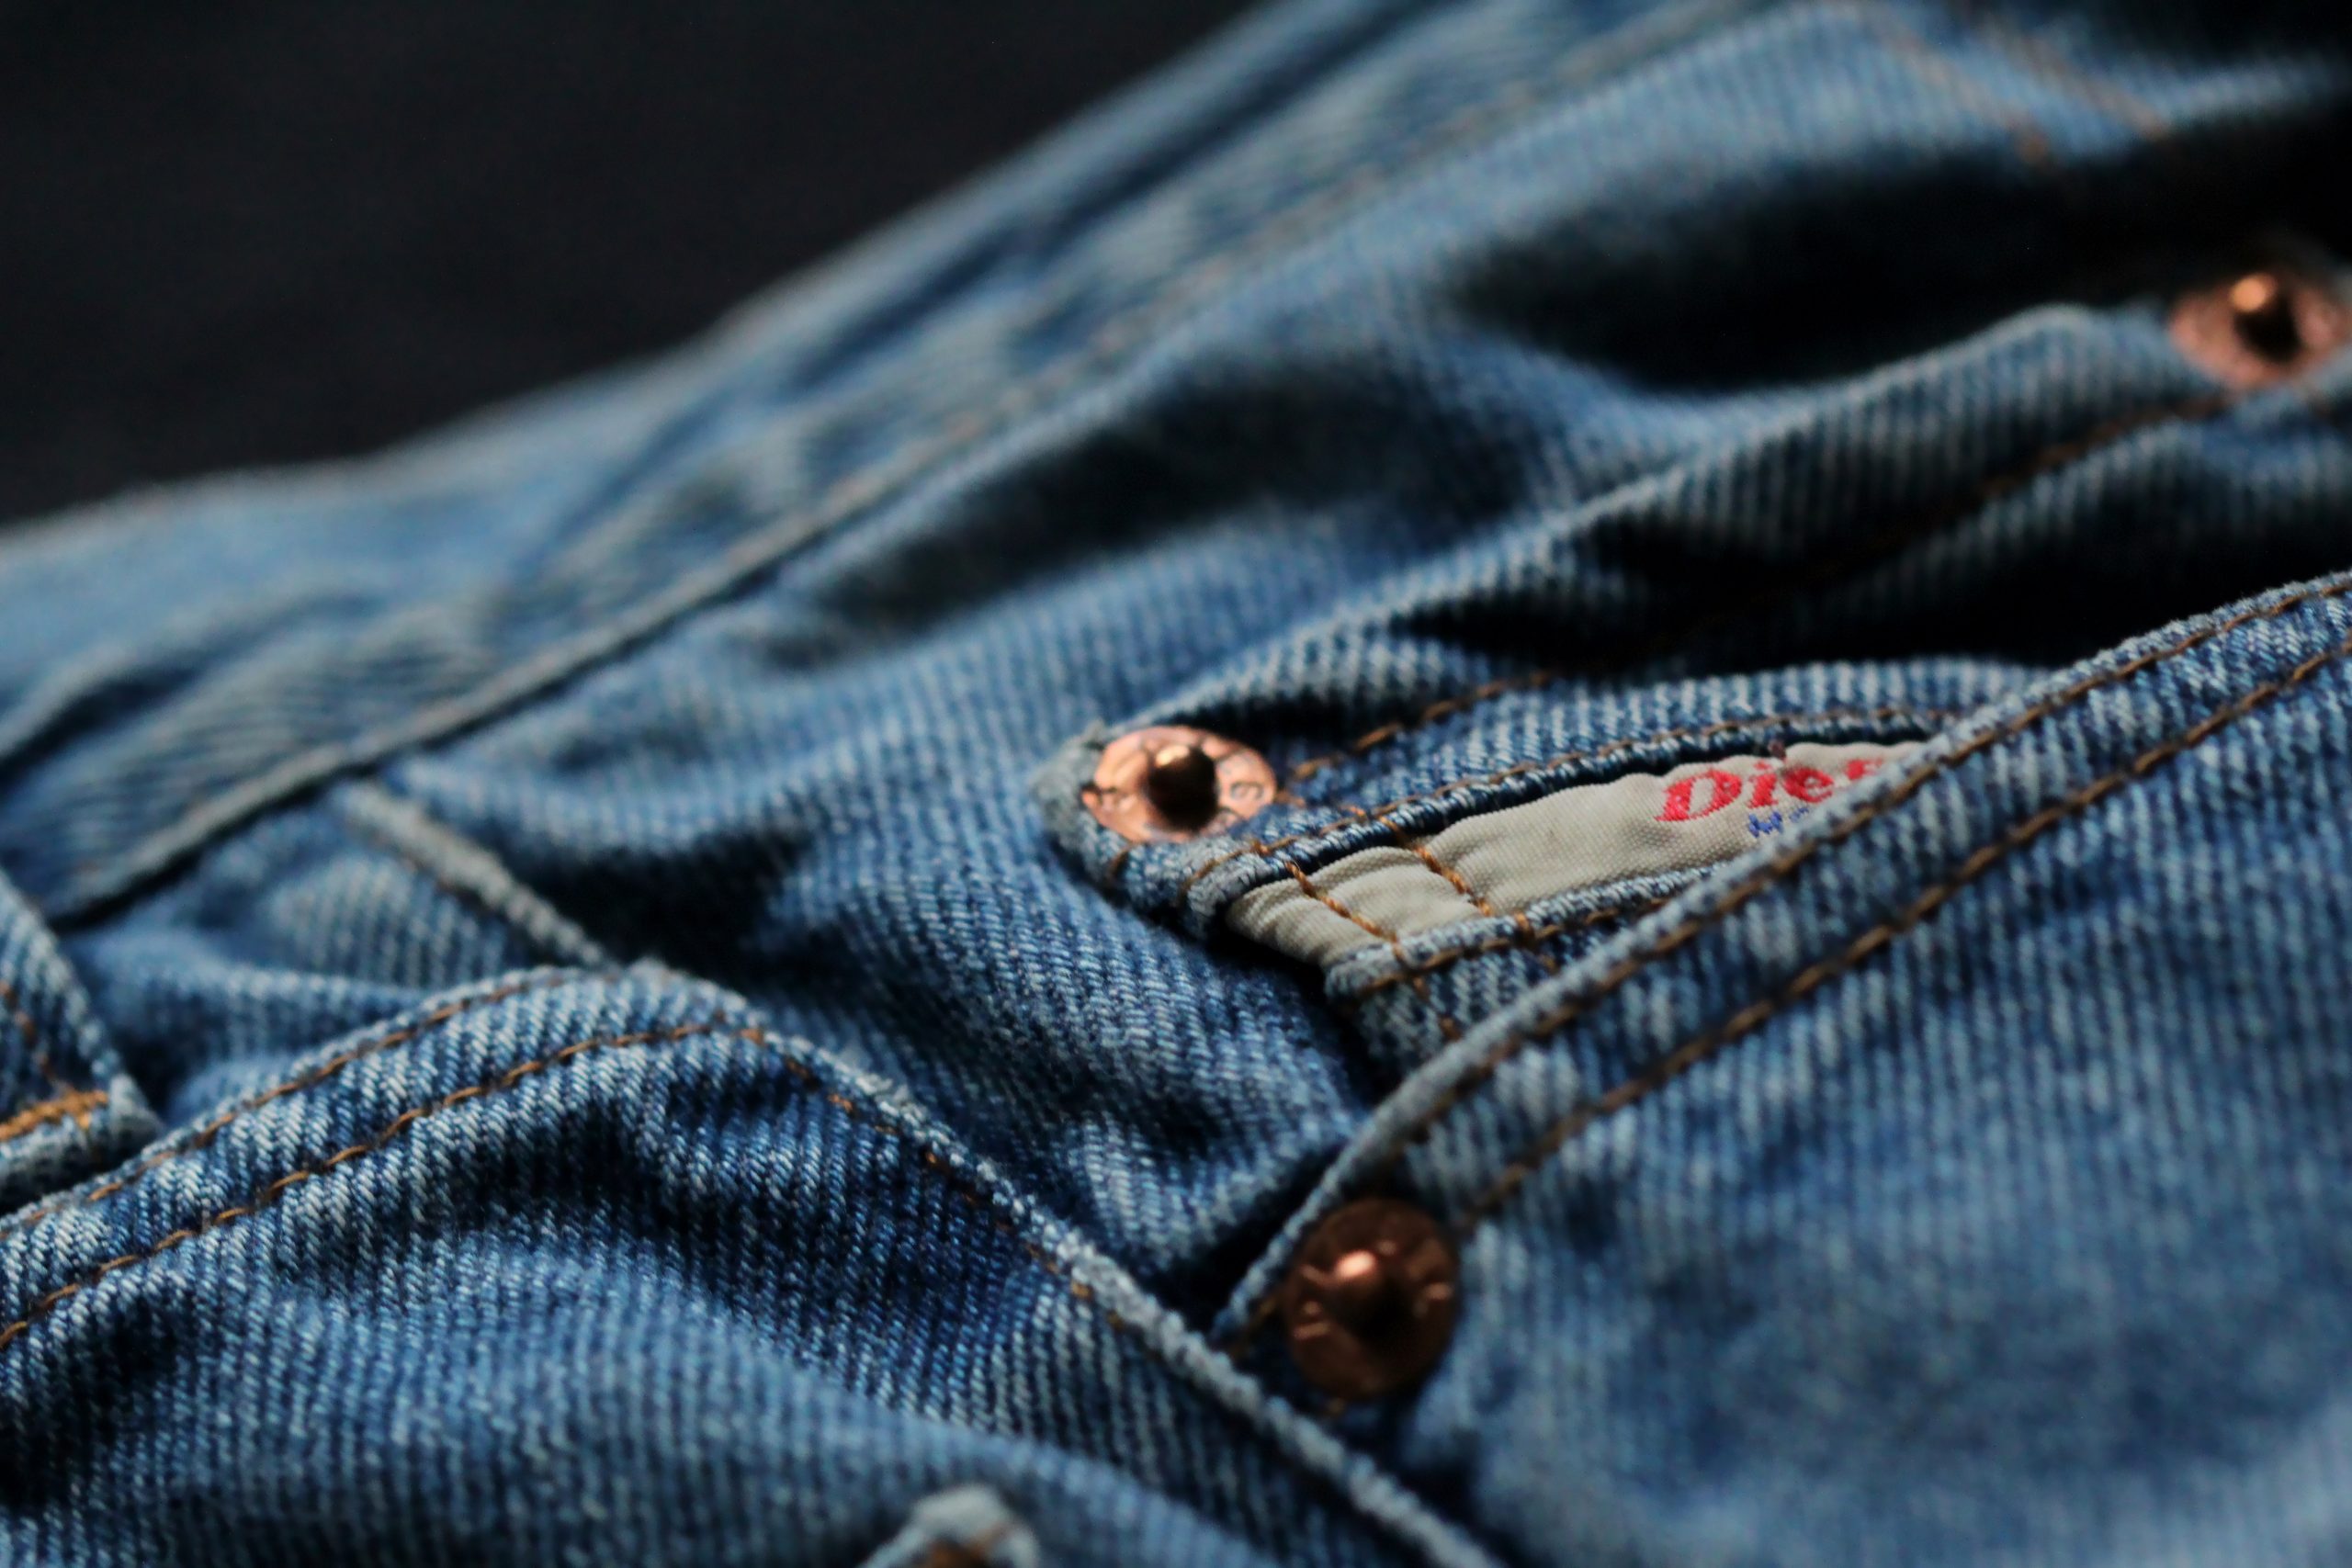 Do you know what the little pocket on the jeans was for? - Free press